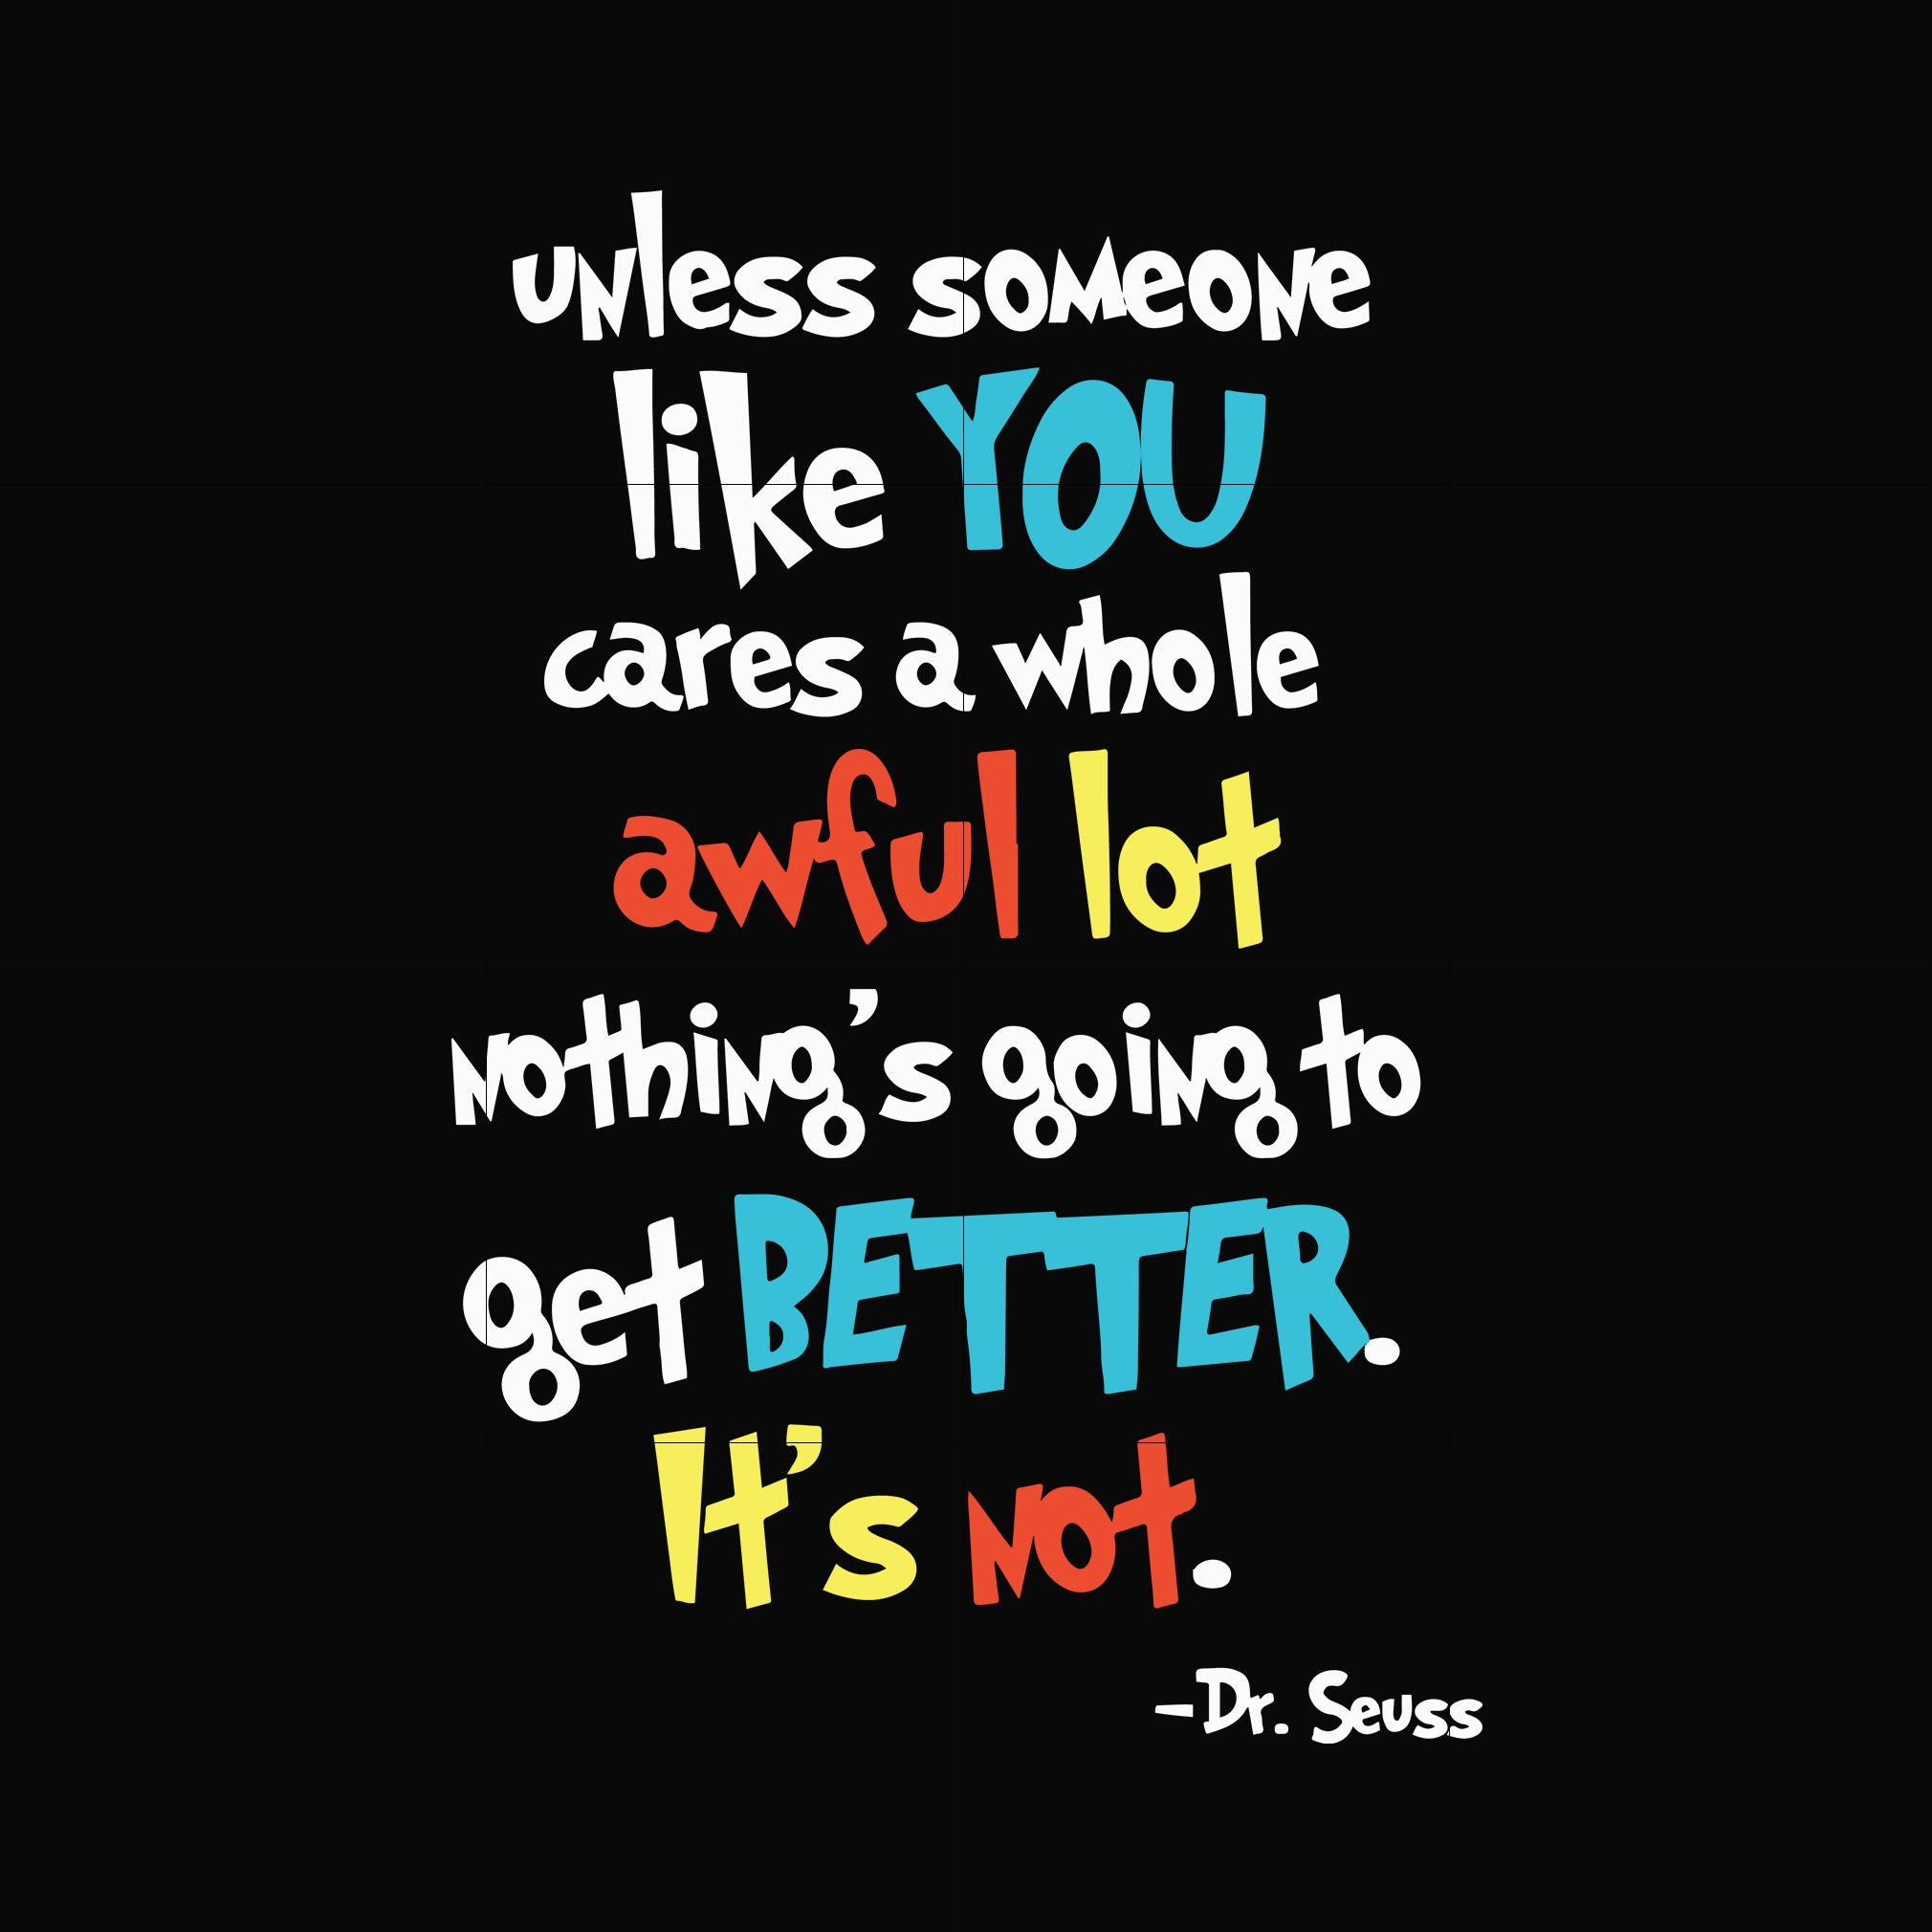 Unless someone like you cares a whole awful lot nothing's going to get better it's not svg, png, dxf, eps file, dr seuss svg, eps, png, dxf